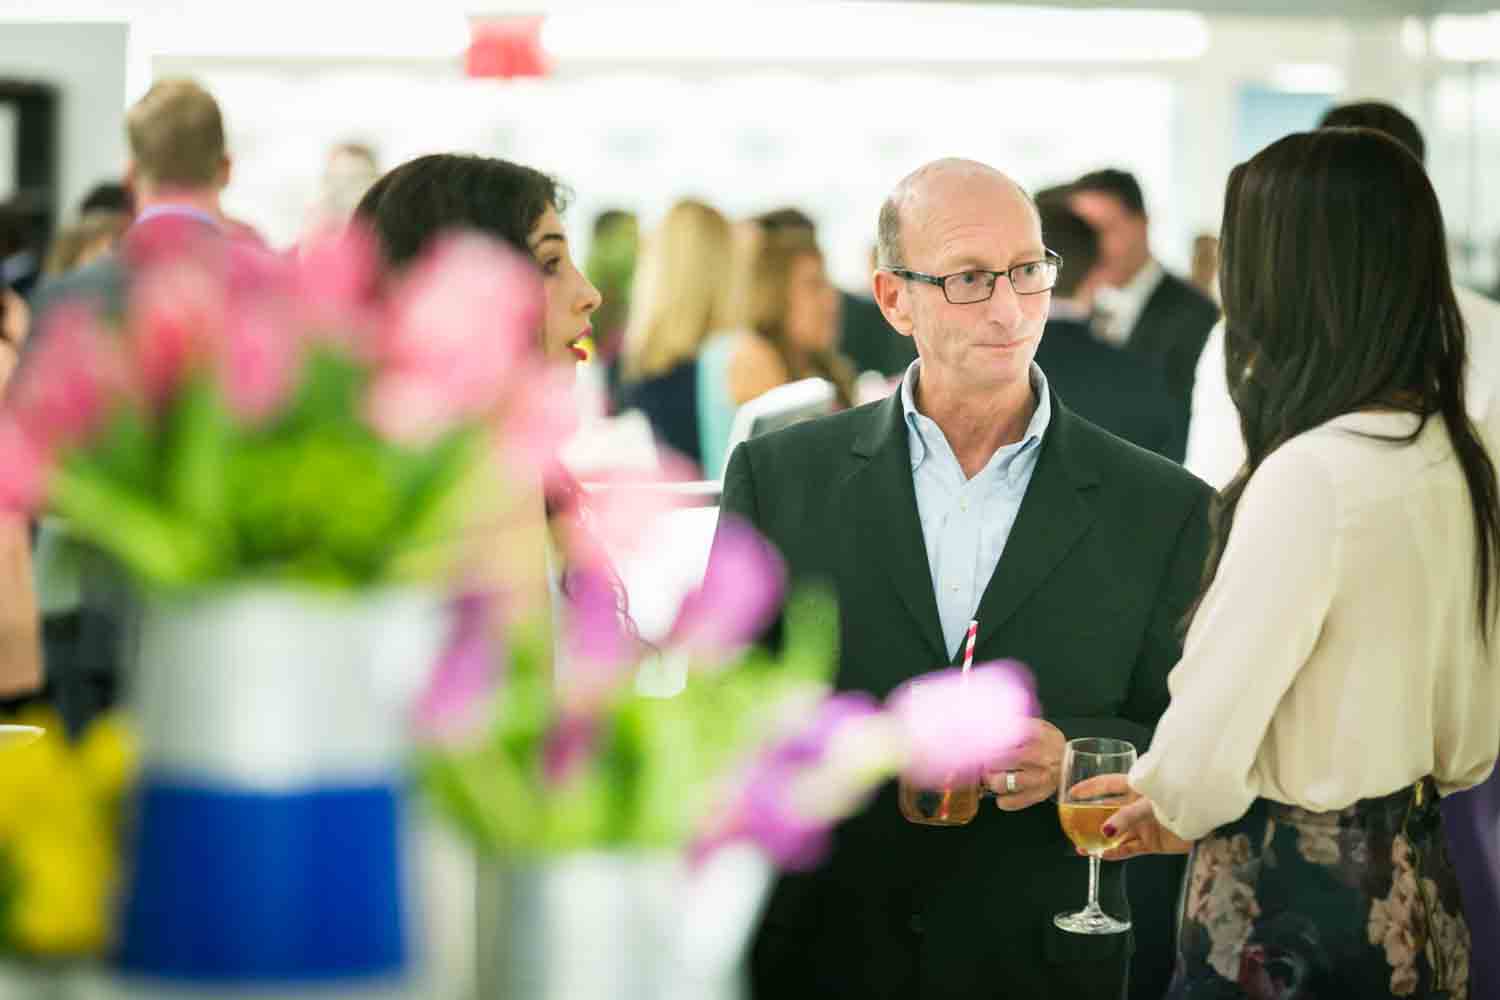 Guests talking at a corporate cocktail party for an article on corporate event planning tips